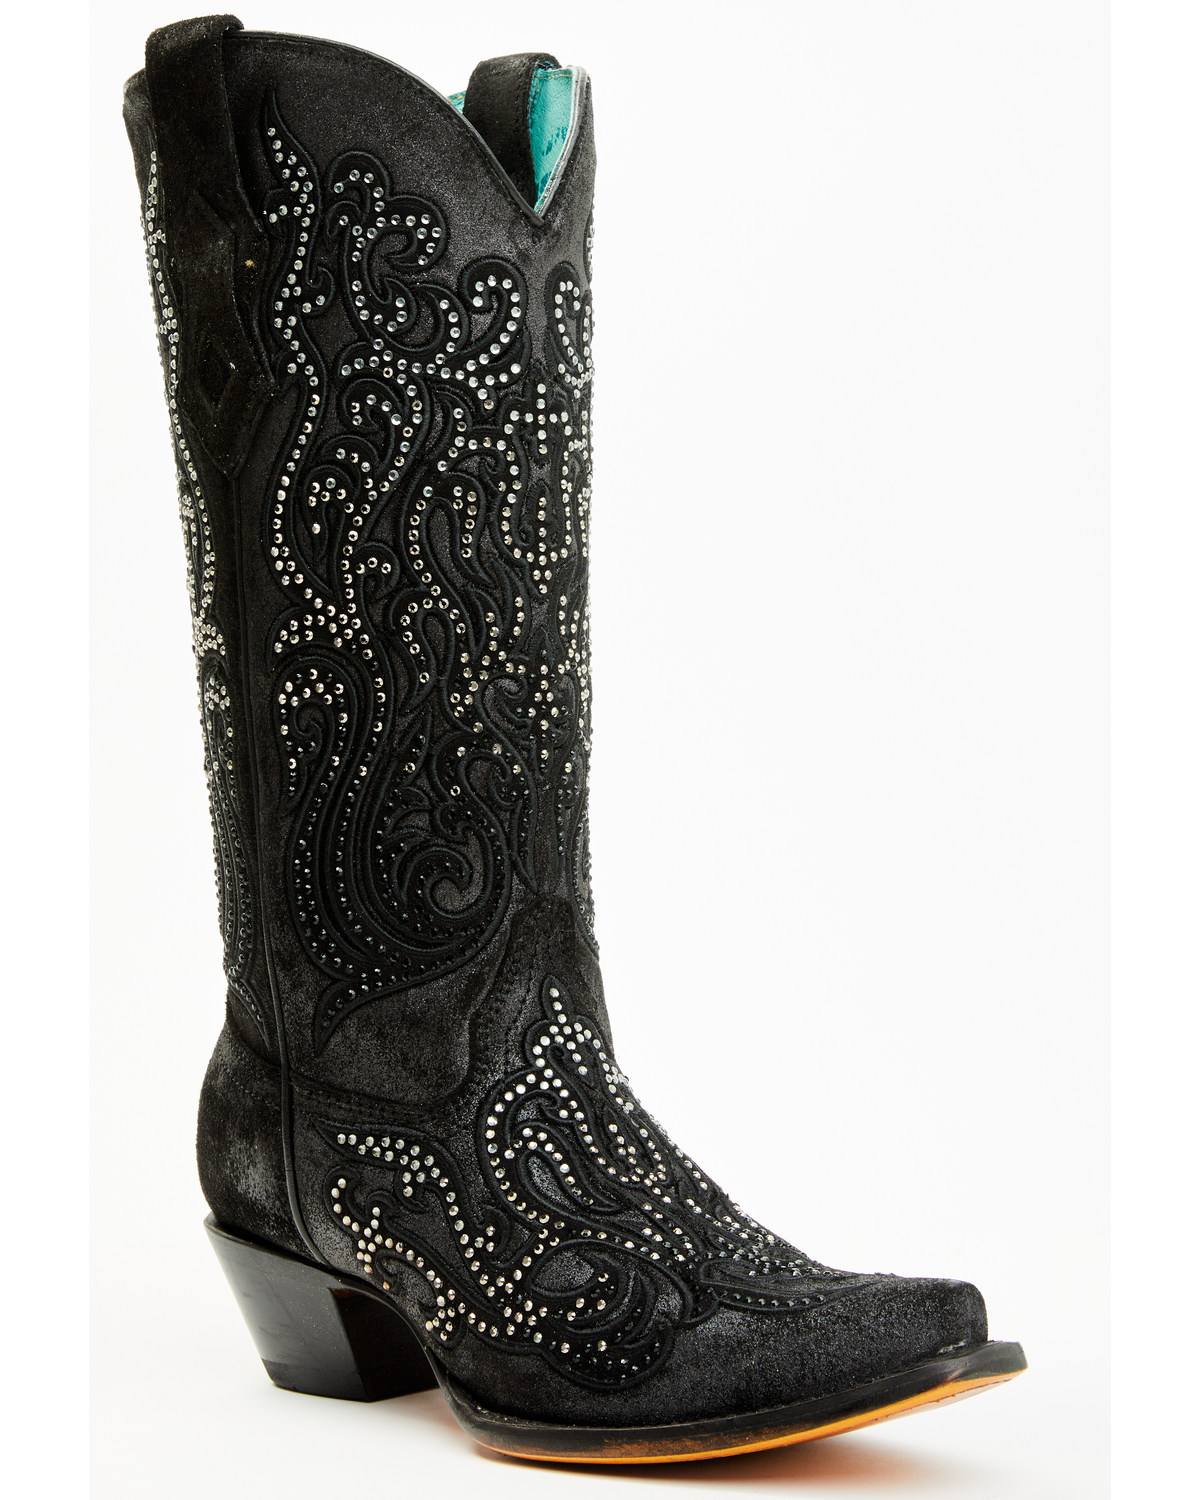 Corral Women's Crystal Embroidered Western Boots